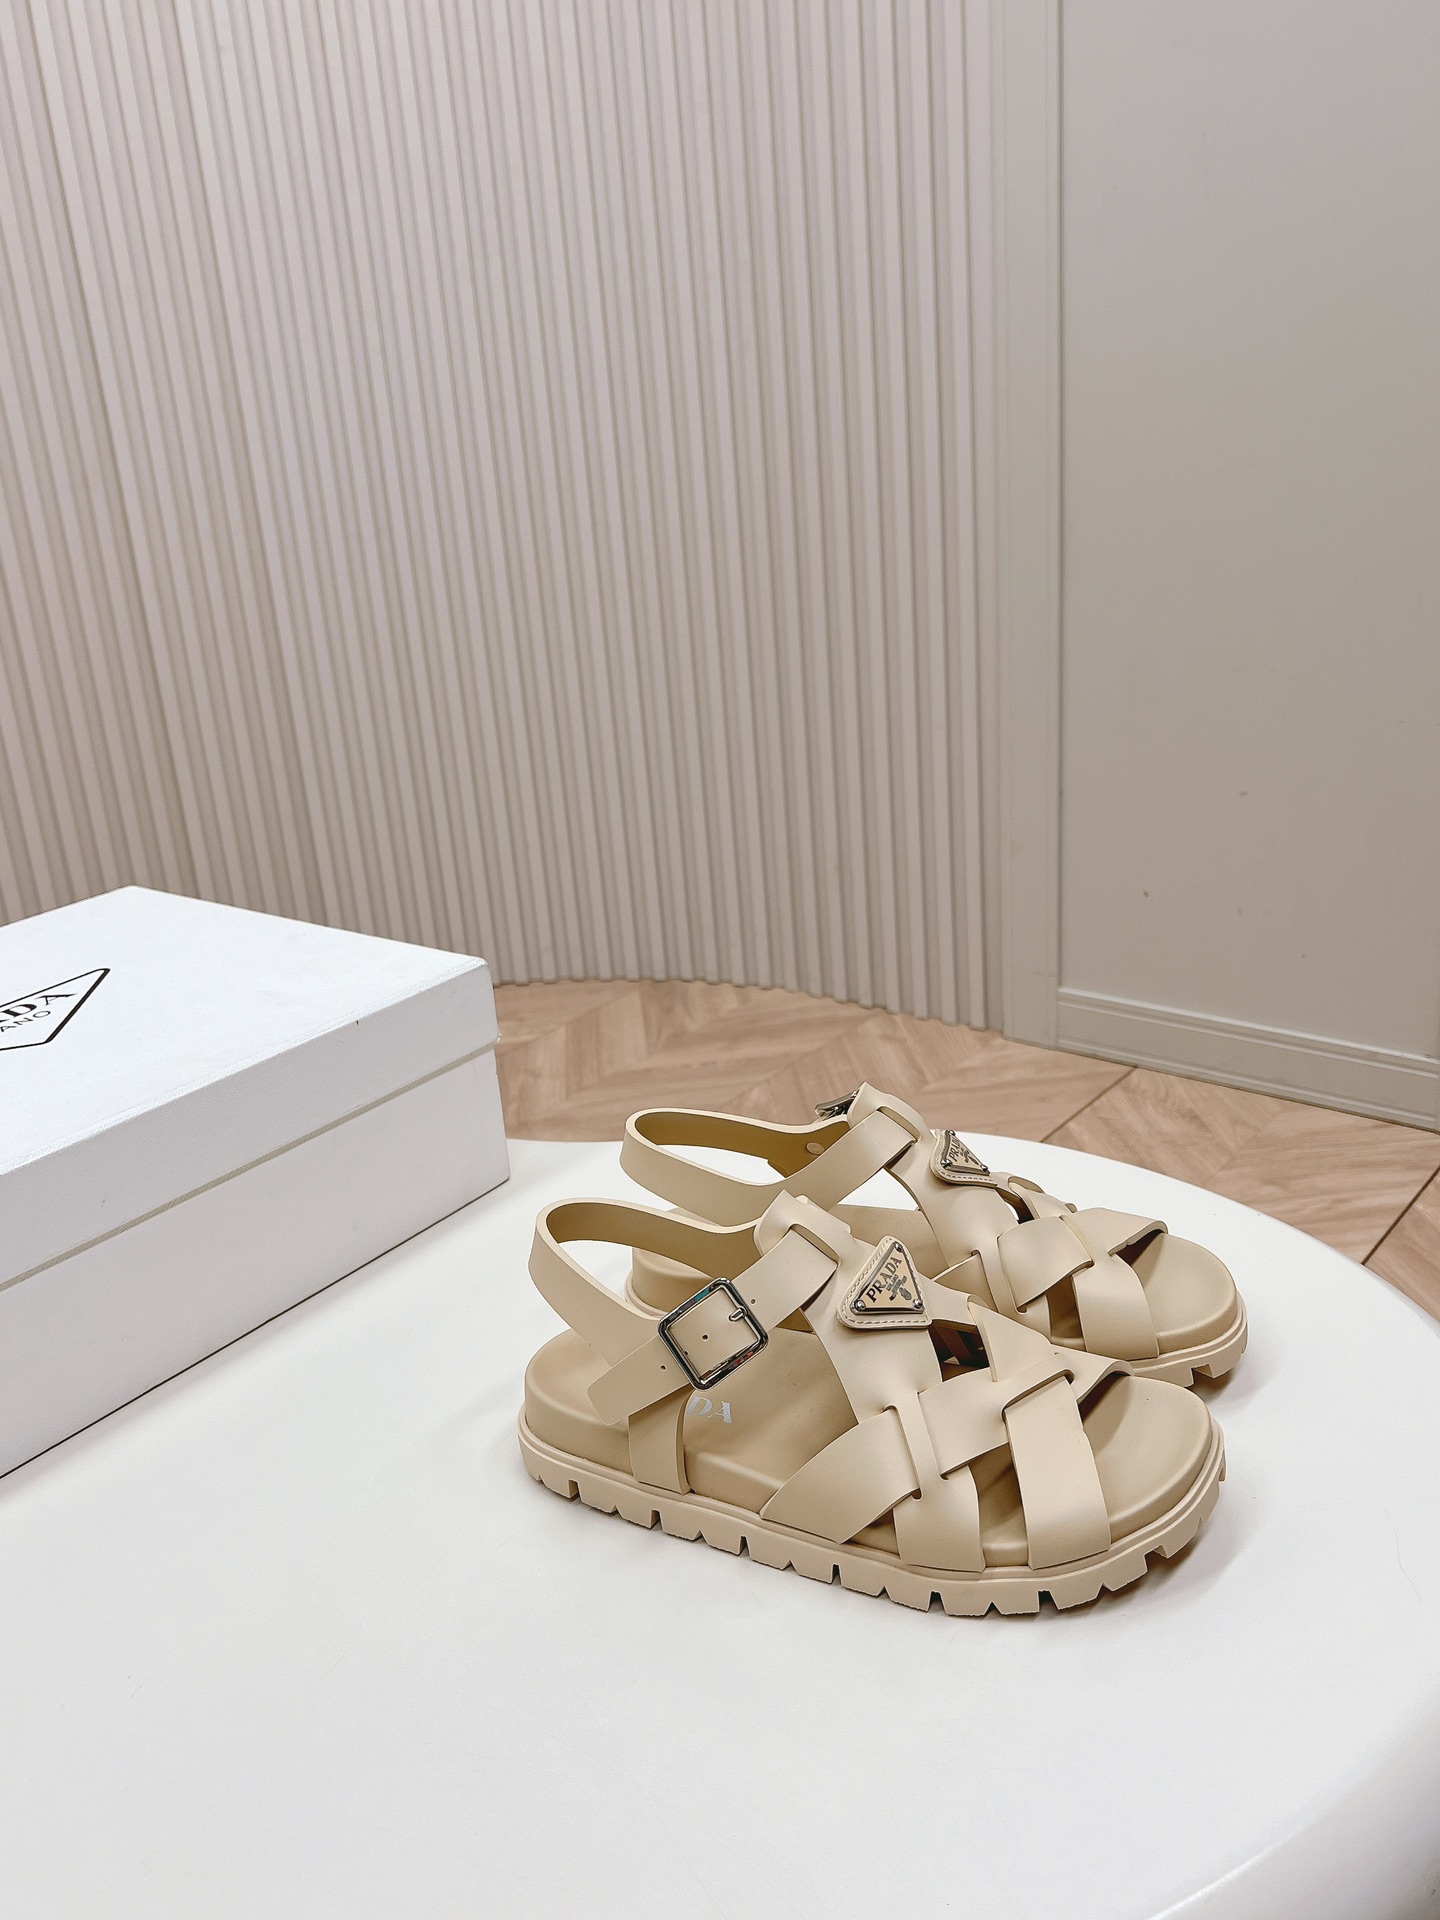 Prada Shoes Sandals Spring/Summer Collection